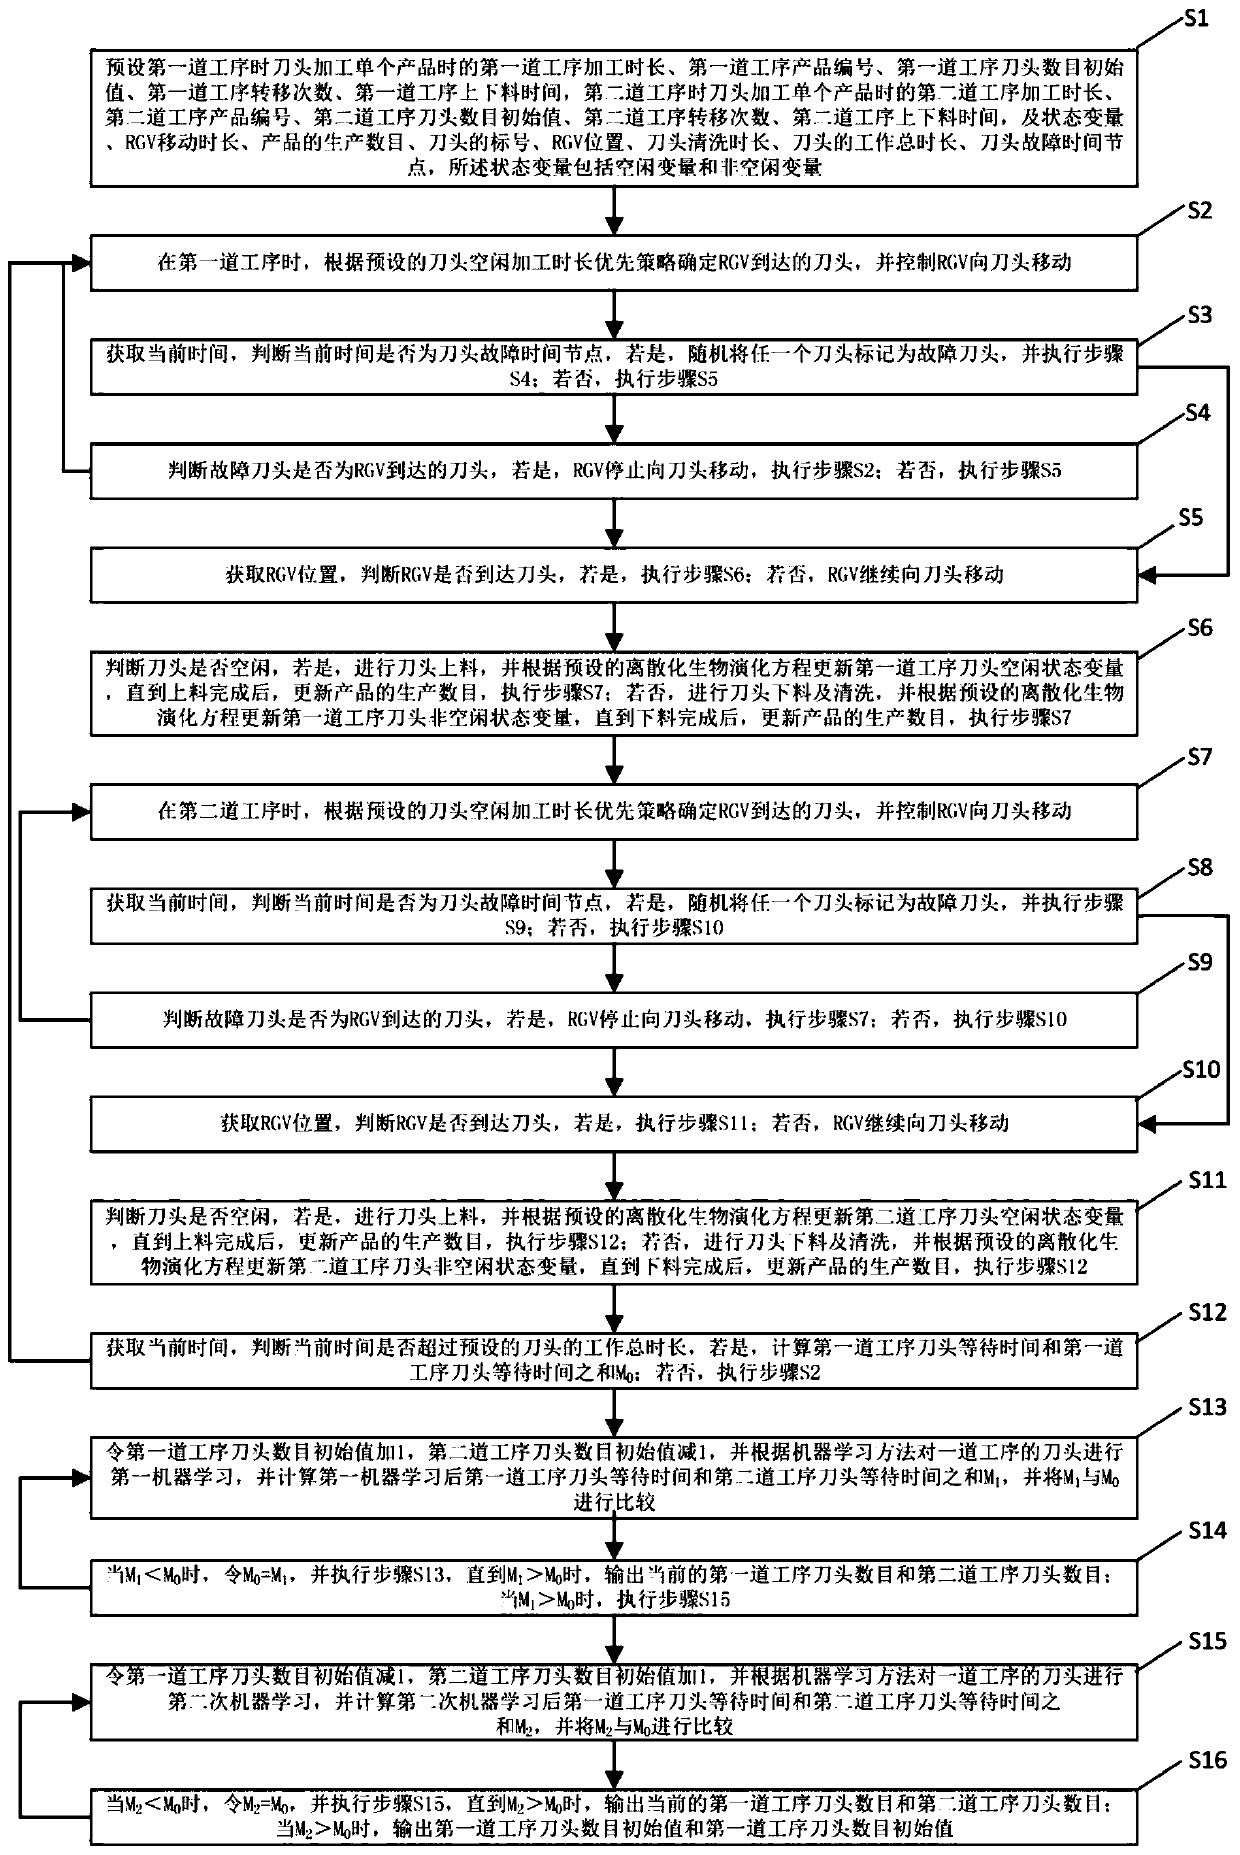 Intelligent two-process processing scheduling method based on fault RGV